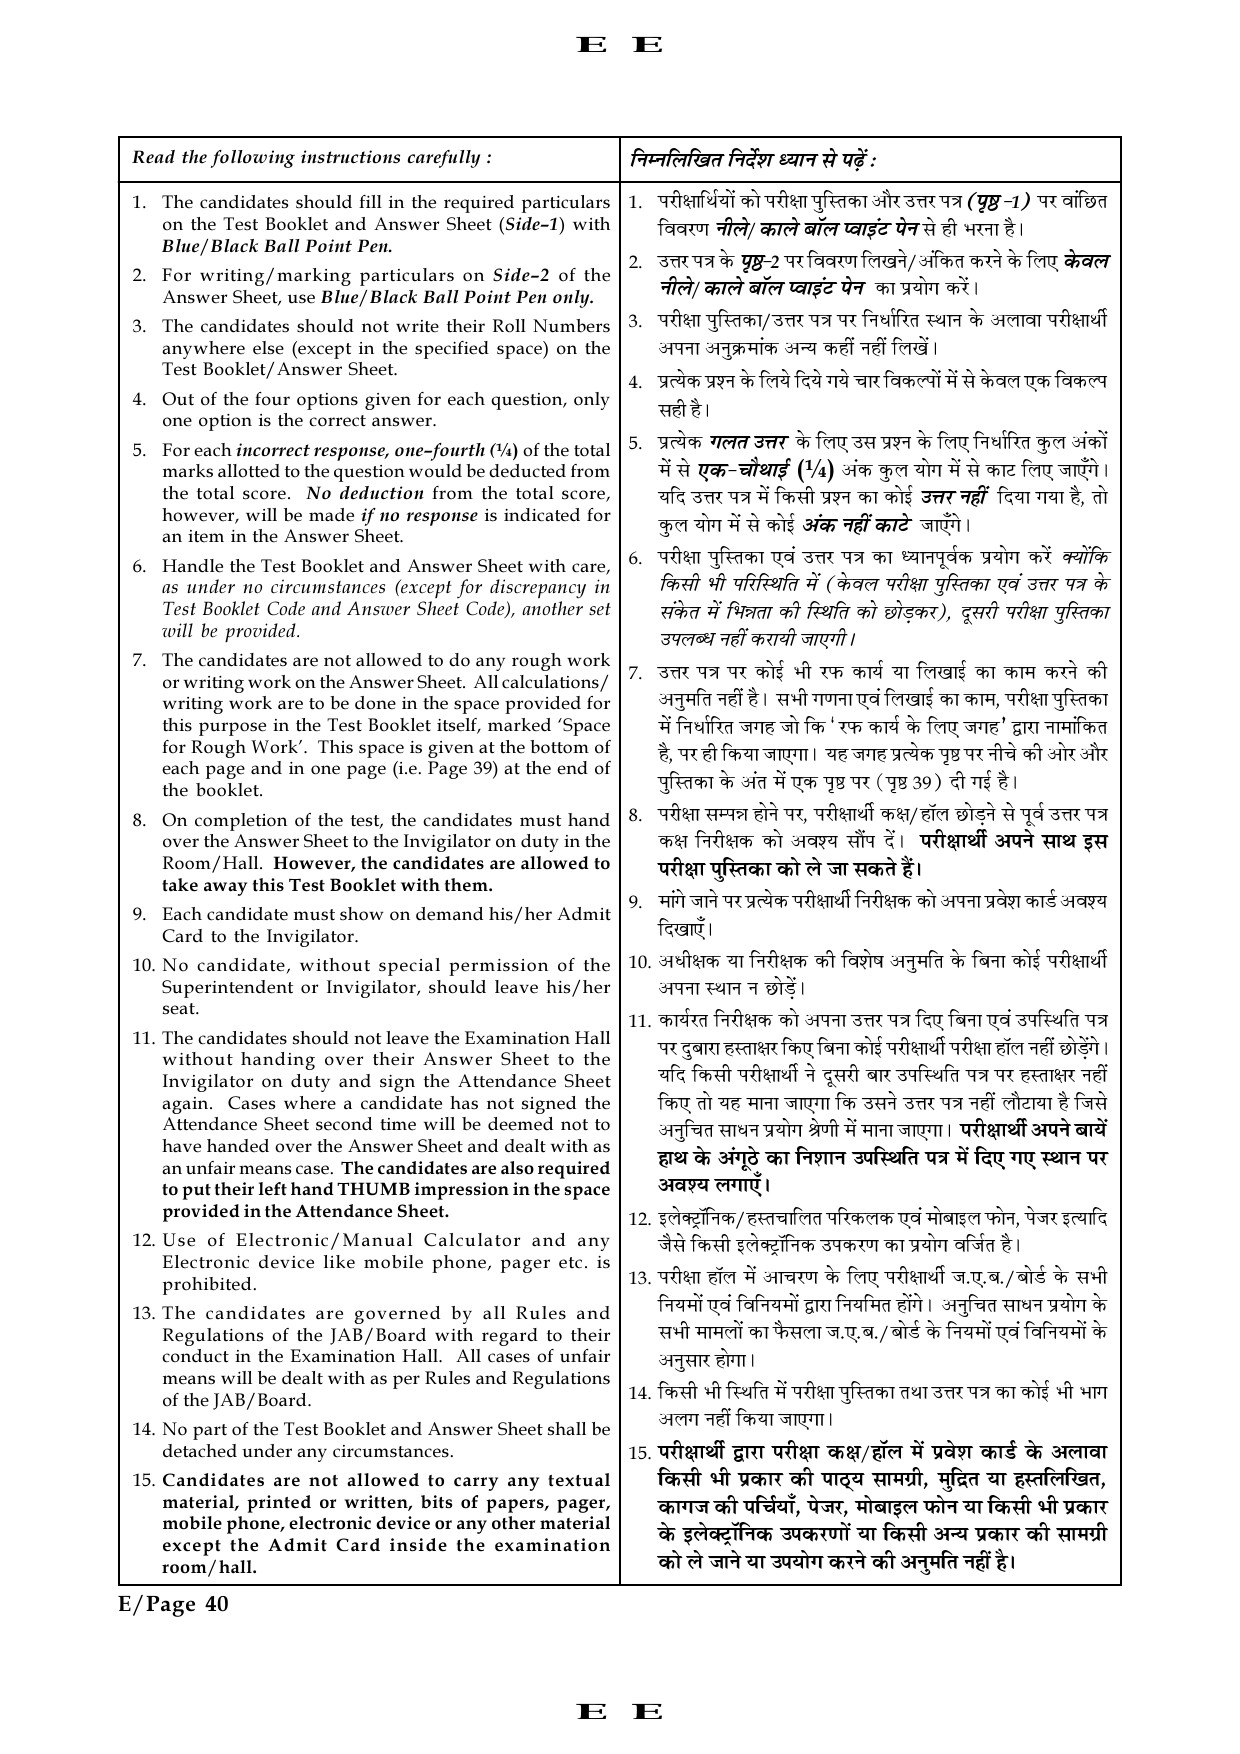 JEE Main Exam Question Paper 2016 Booklet E 39